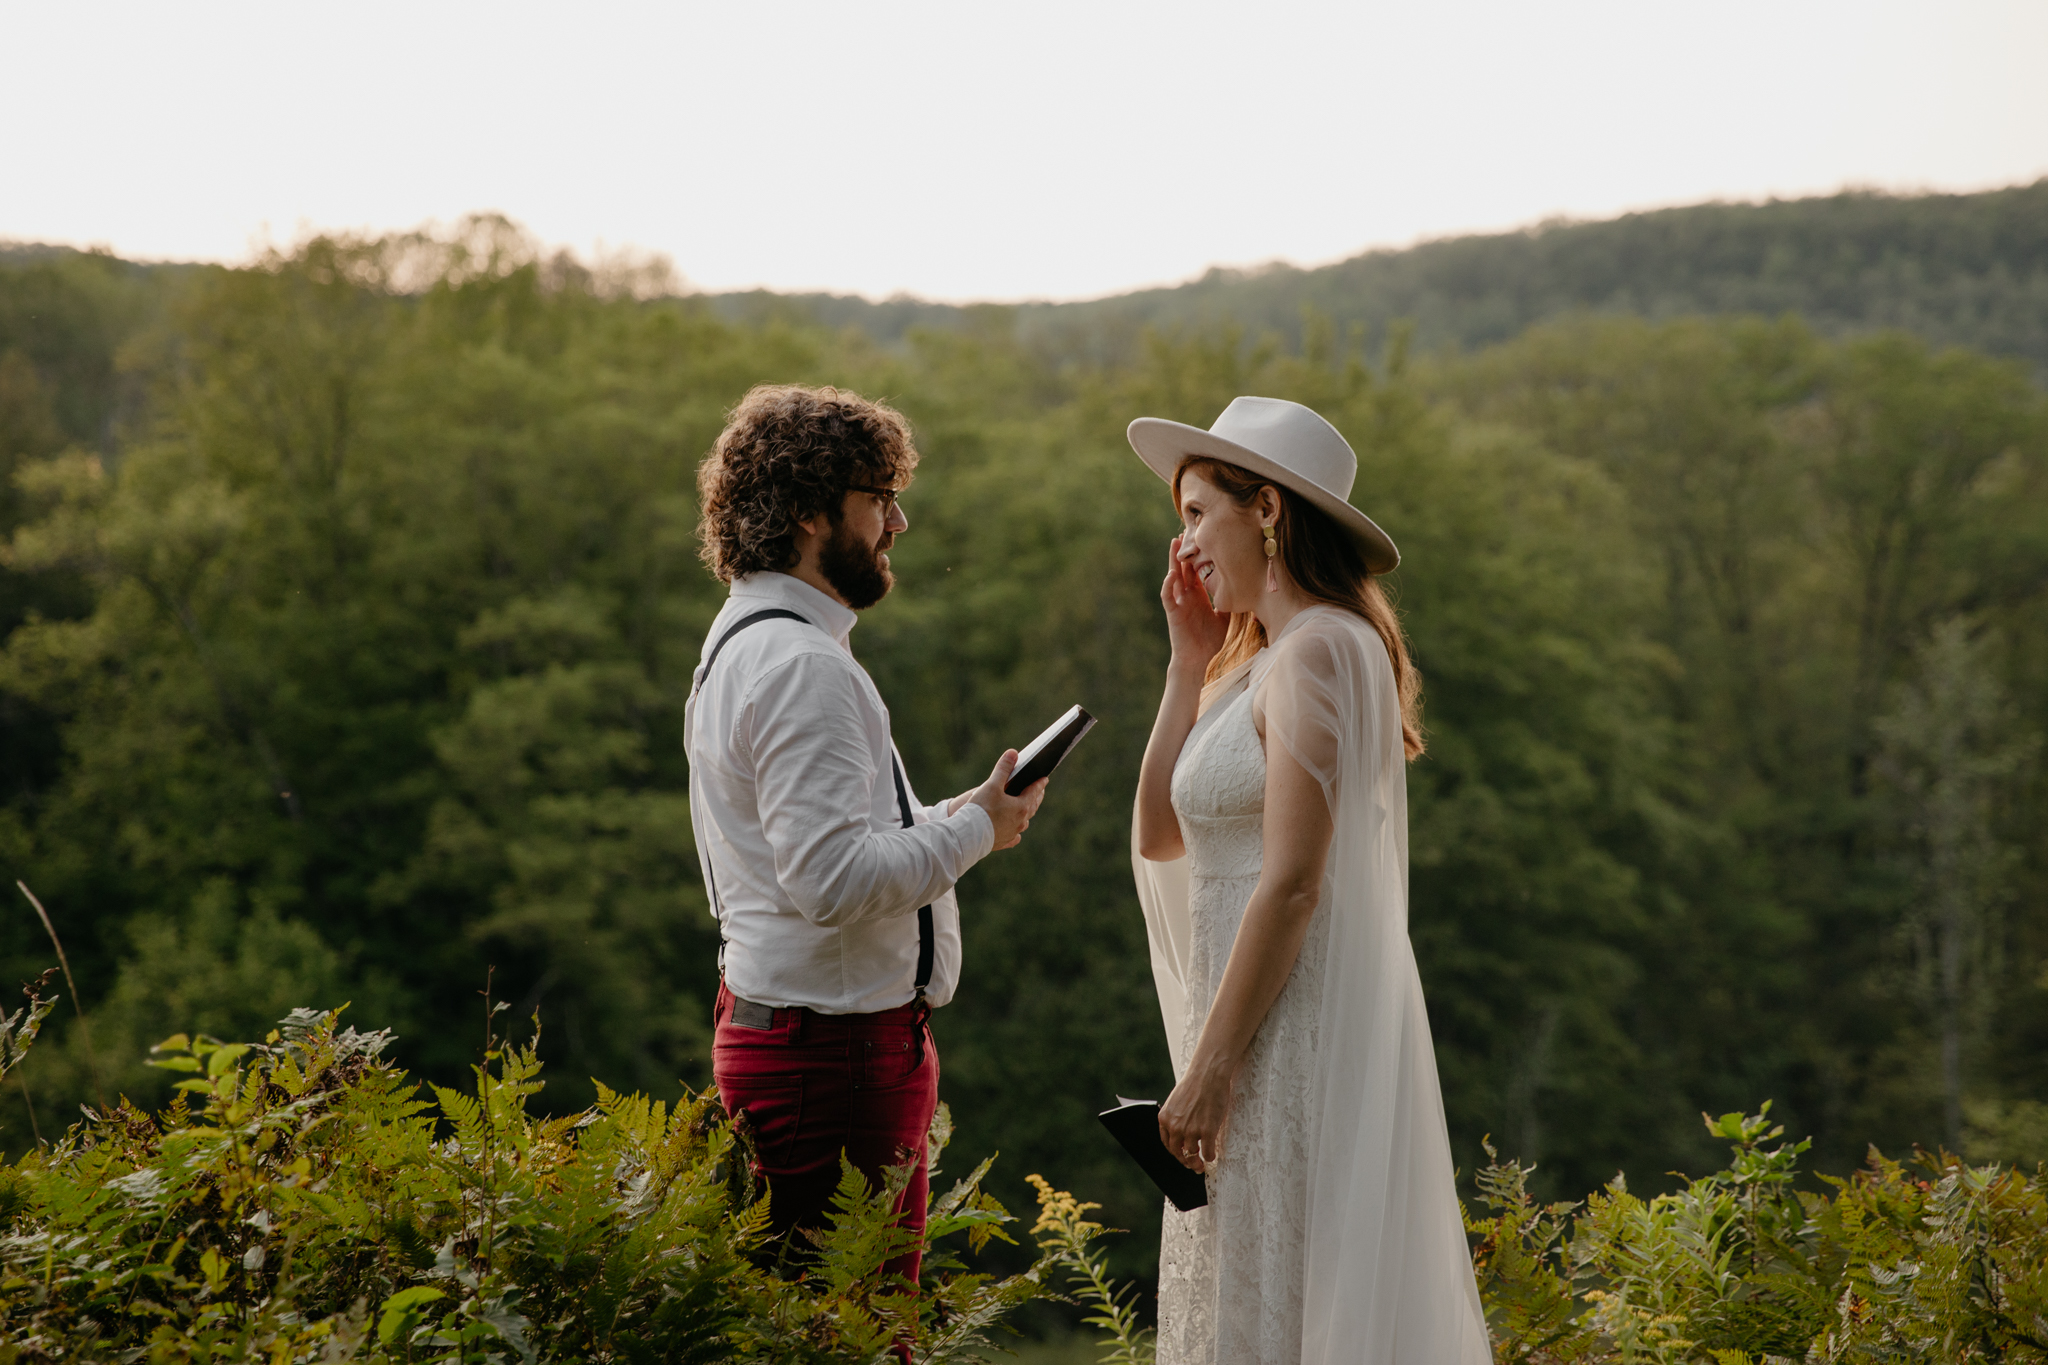 Ope! 7 Best Places to Elope in the Midwest - Huron-Manistee Forest, Michigan Elopement